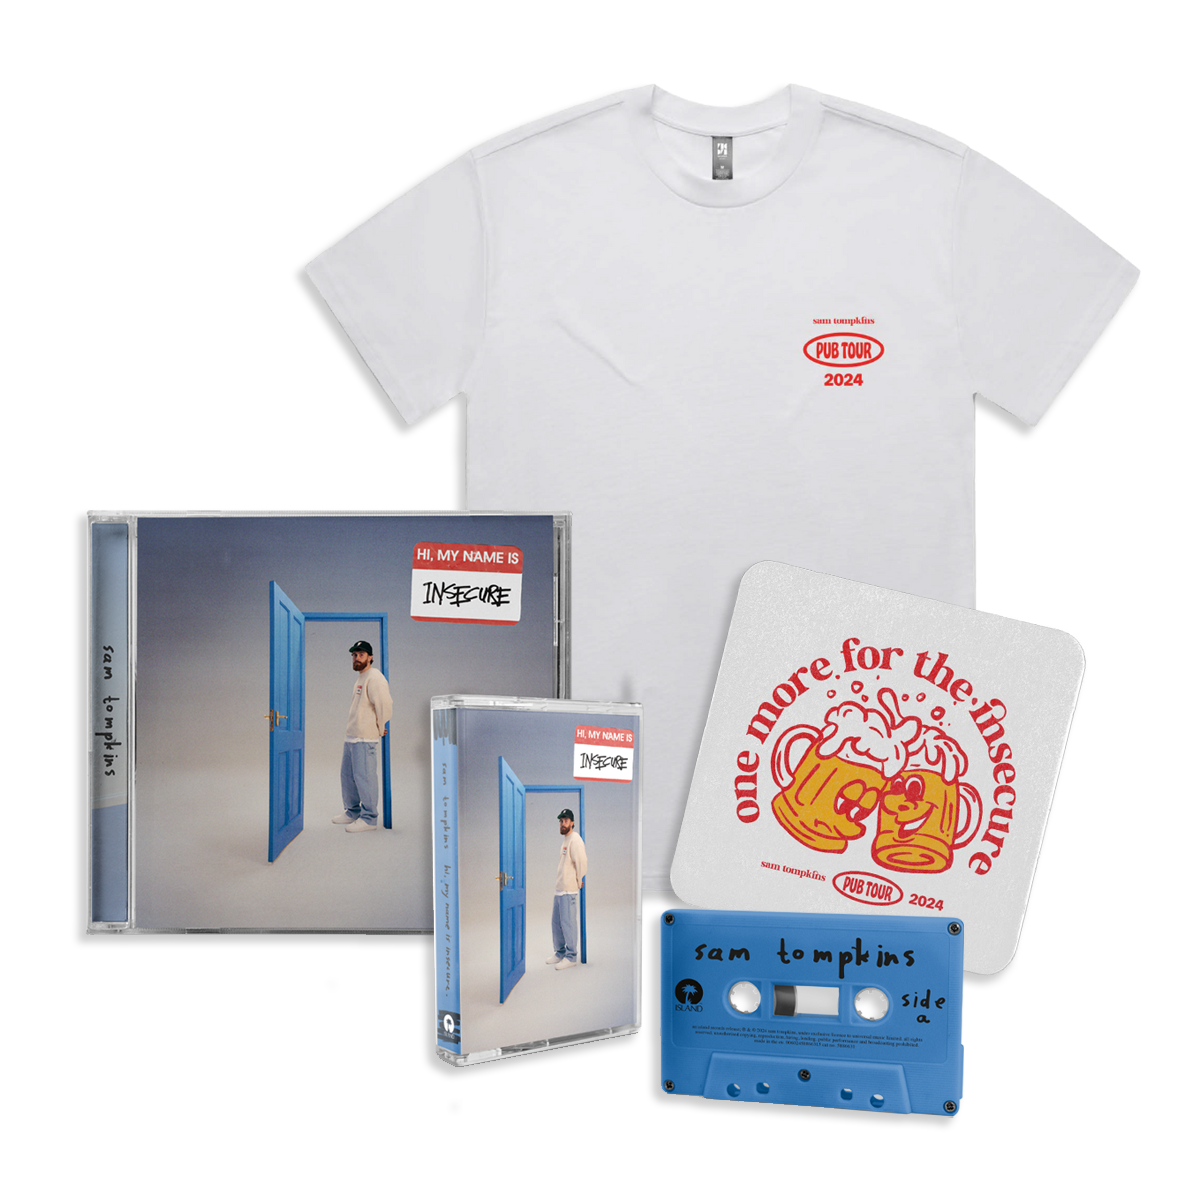 hi, my name is insecure: CD, Cassette, Pub Tour T-Shirt + Signed Beer Mat